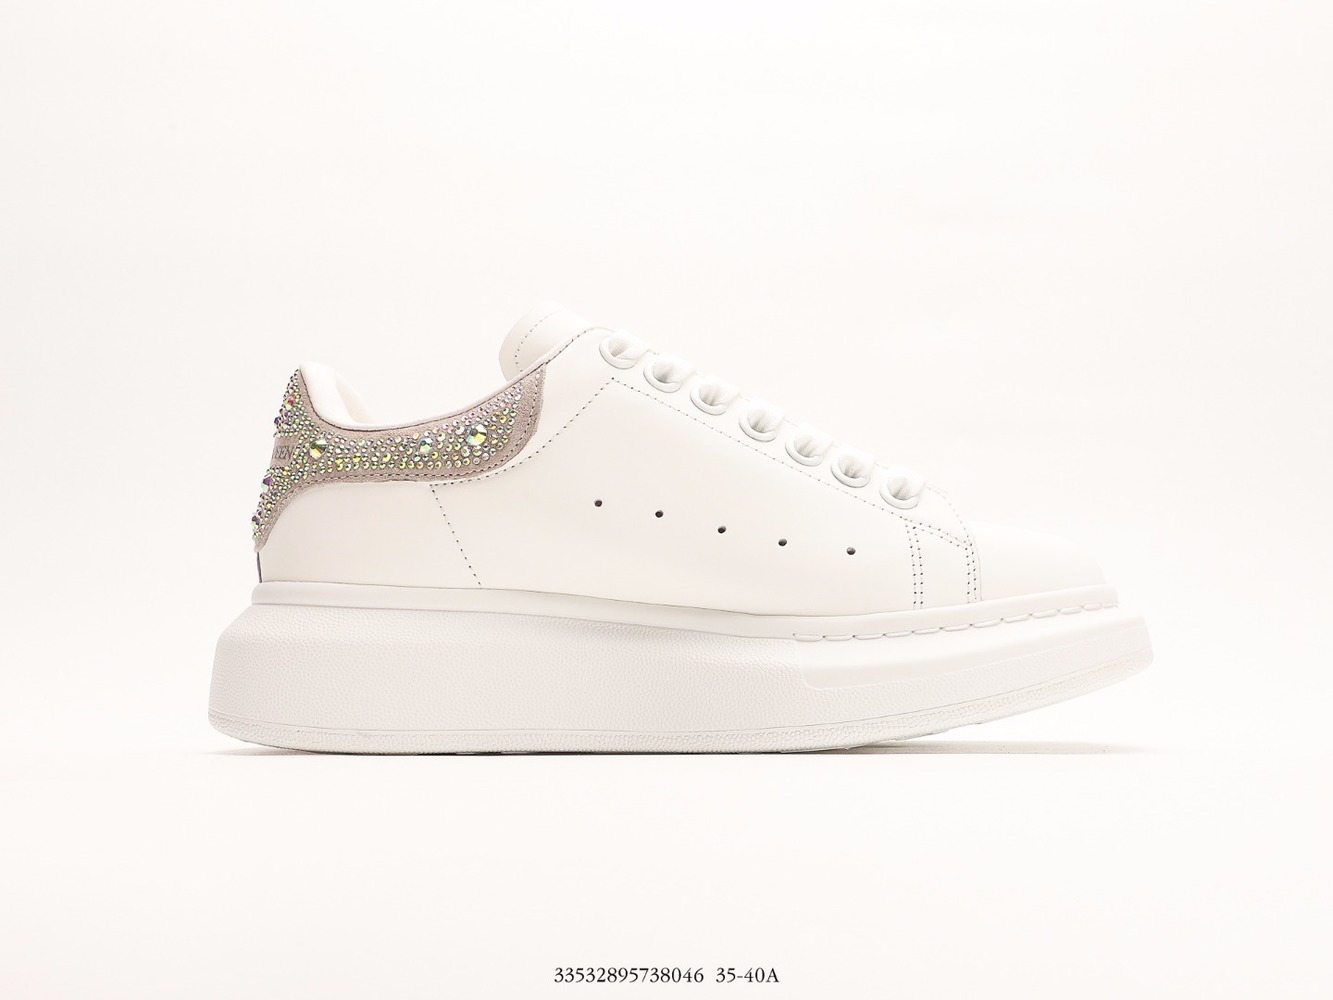 Alexander McQueen Sole Leather Sneakers_Size_35 36 37 38 39 40_